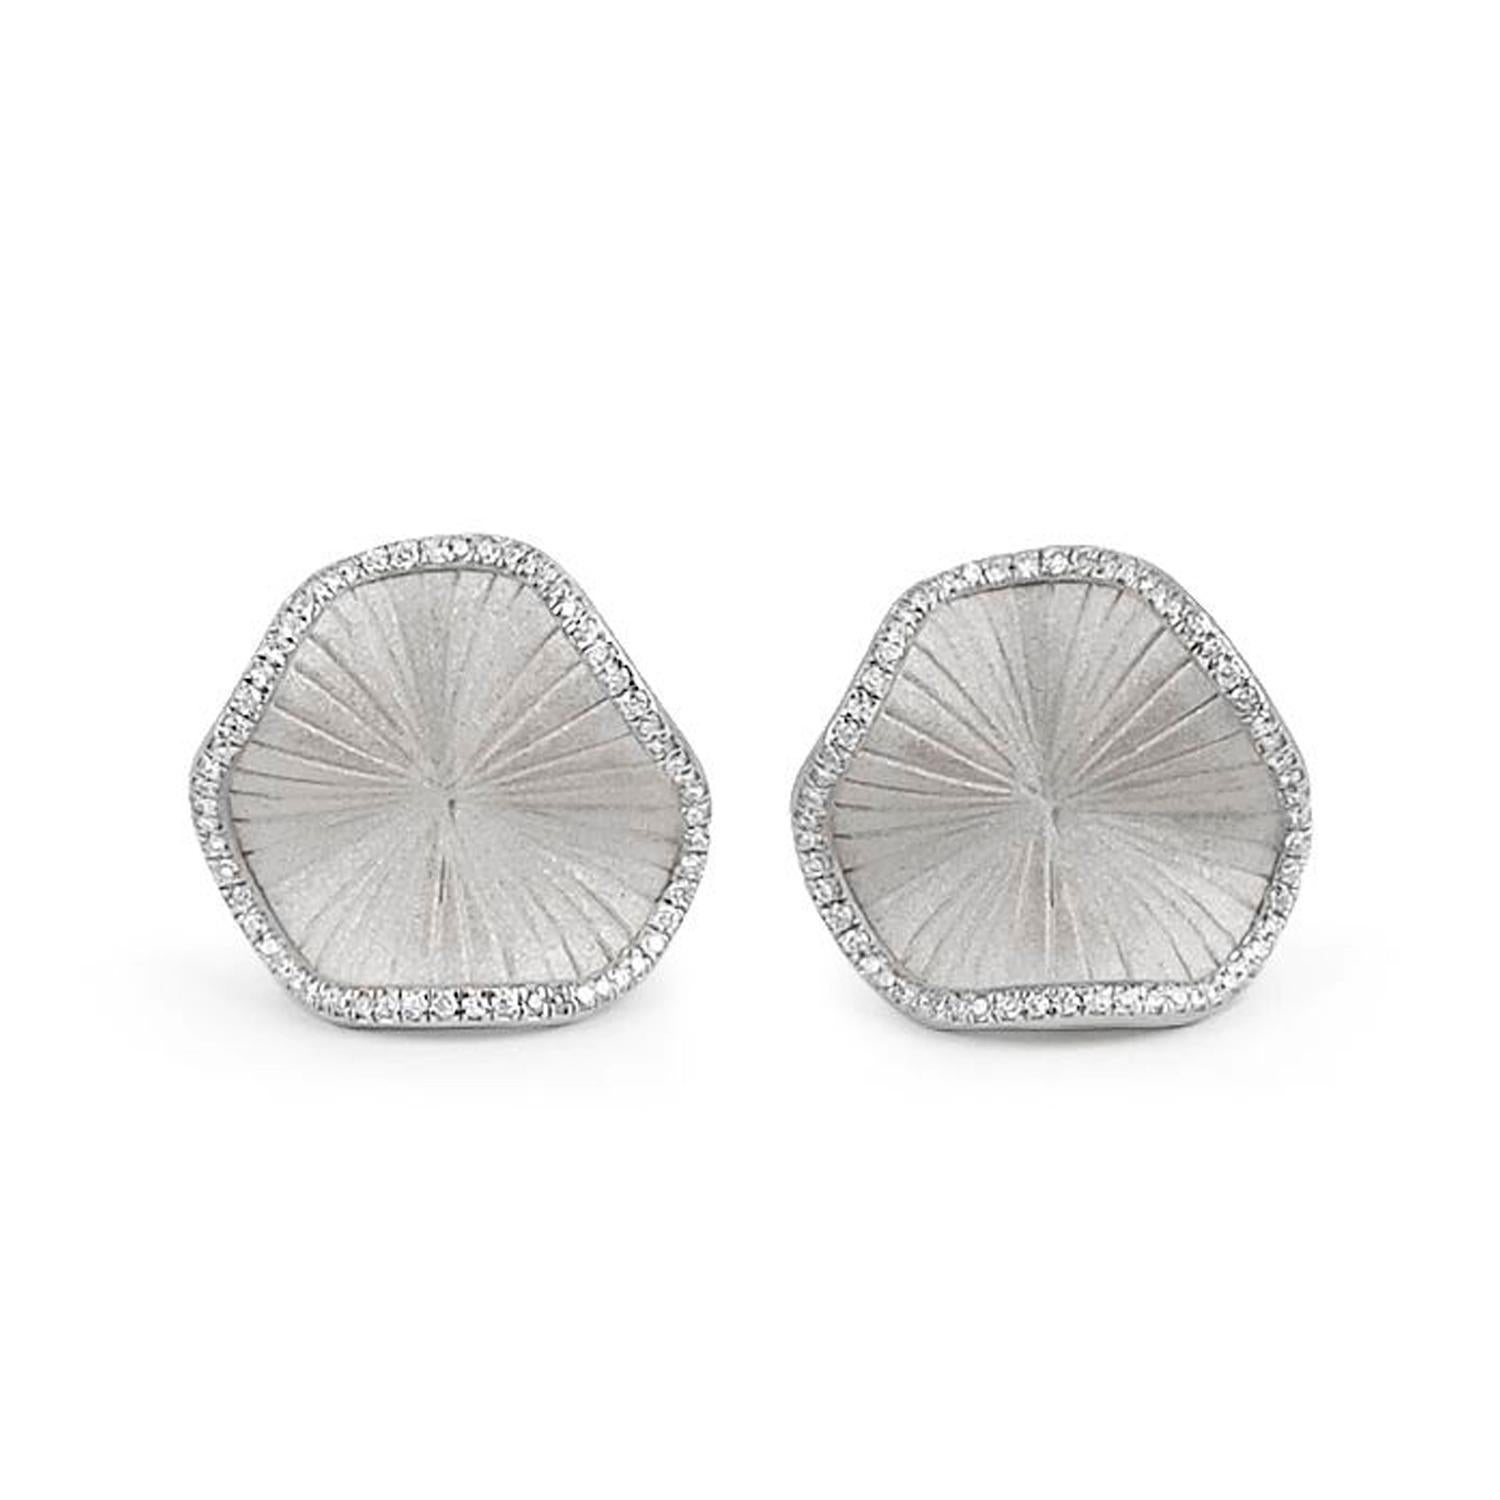 From Annamaria Cammilli's Vision collection, Sultana earrings handcrafted in 18 karat white gold. Single ruffle style is outlined with bead set white diamonds at 0.36 carat total weight. 

Sculpted in Florence, Italy, the Annamaria Cammilli brand is